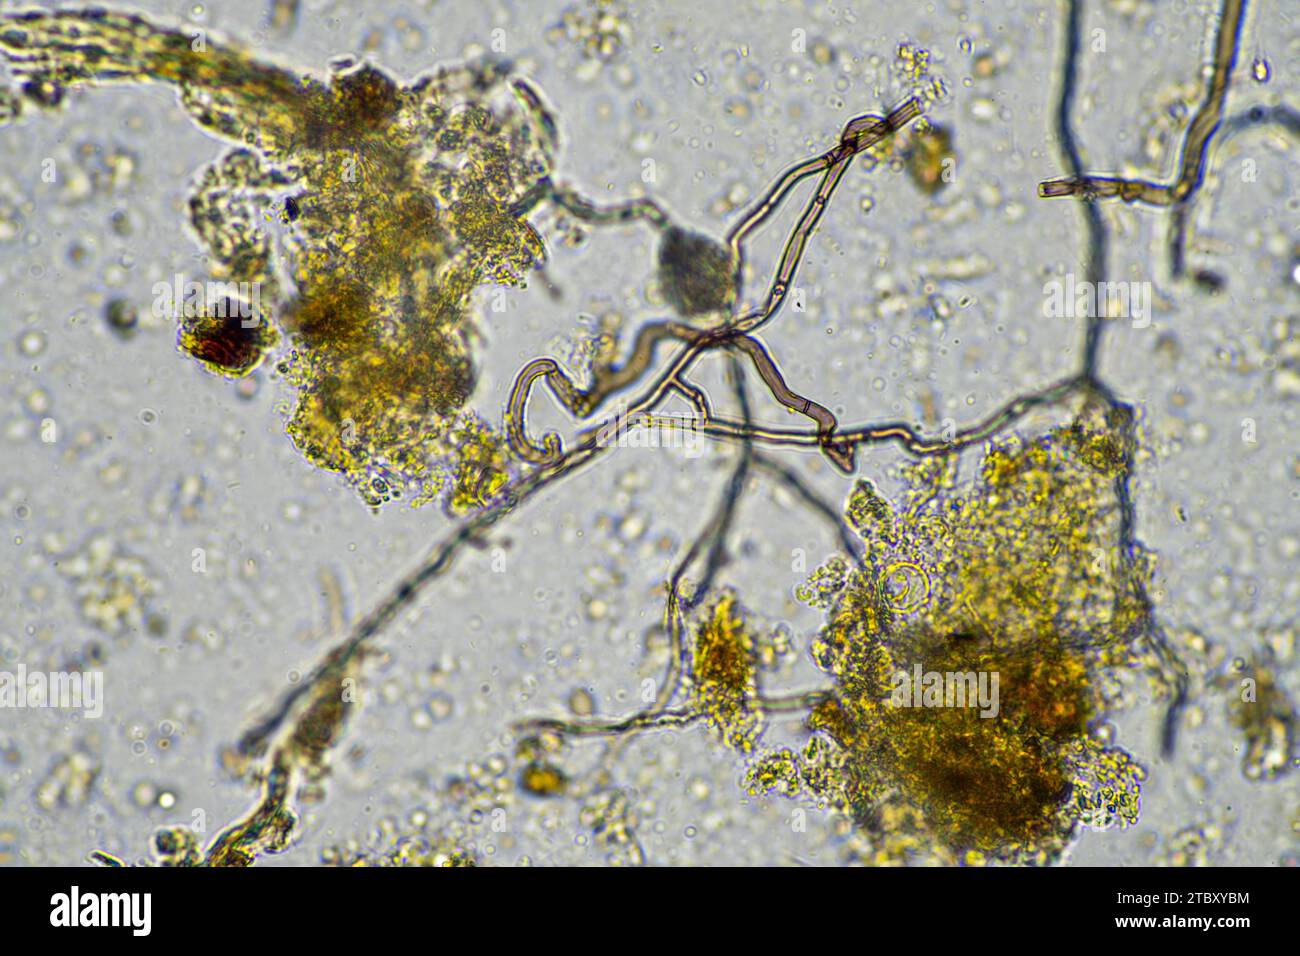 Microorganisms and biology in Compost and soil sample under the microscope Stock Photo